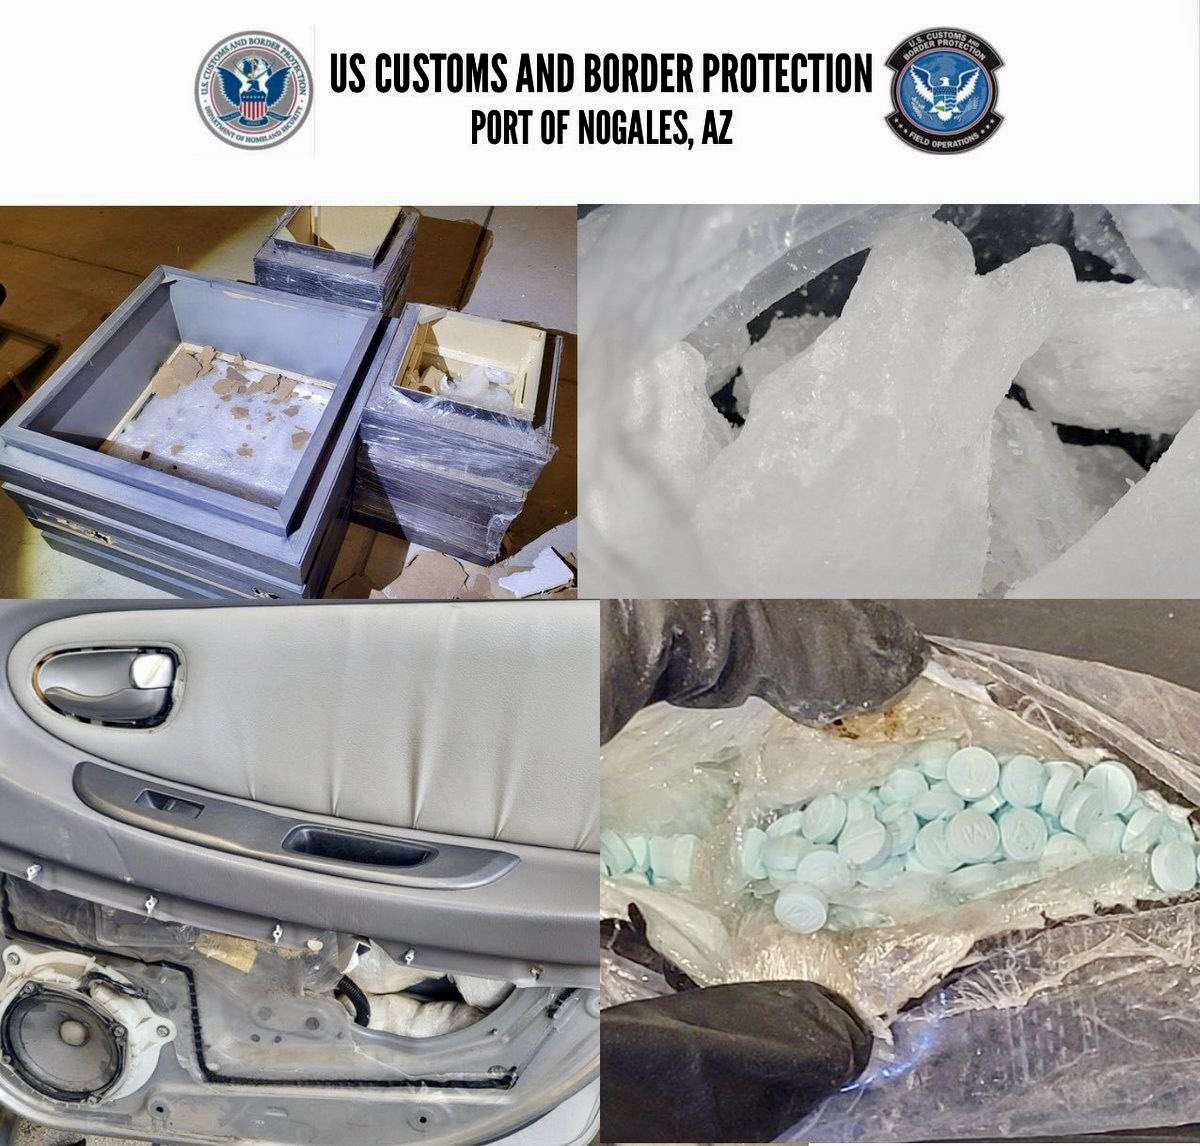 4/9: CBP officers at the Nogales POE seized approximately 117,675 fentanyl pills and 19.15 pounds meth in doors and panels of a vehicle 4/11: Officers discovered 100 pounds meth hidden in new furniture. Both drivers were taken into custody and will be detained for prosecution.